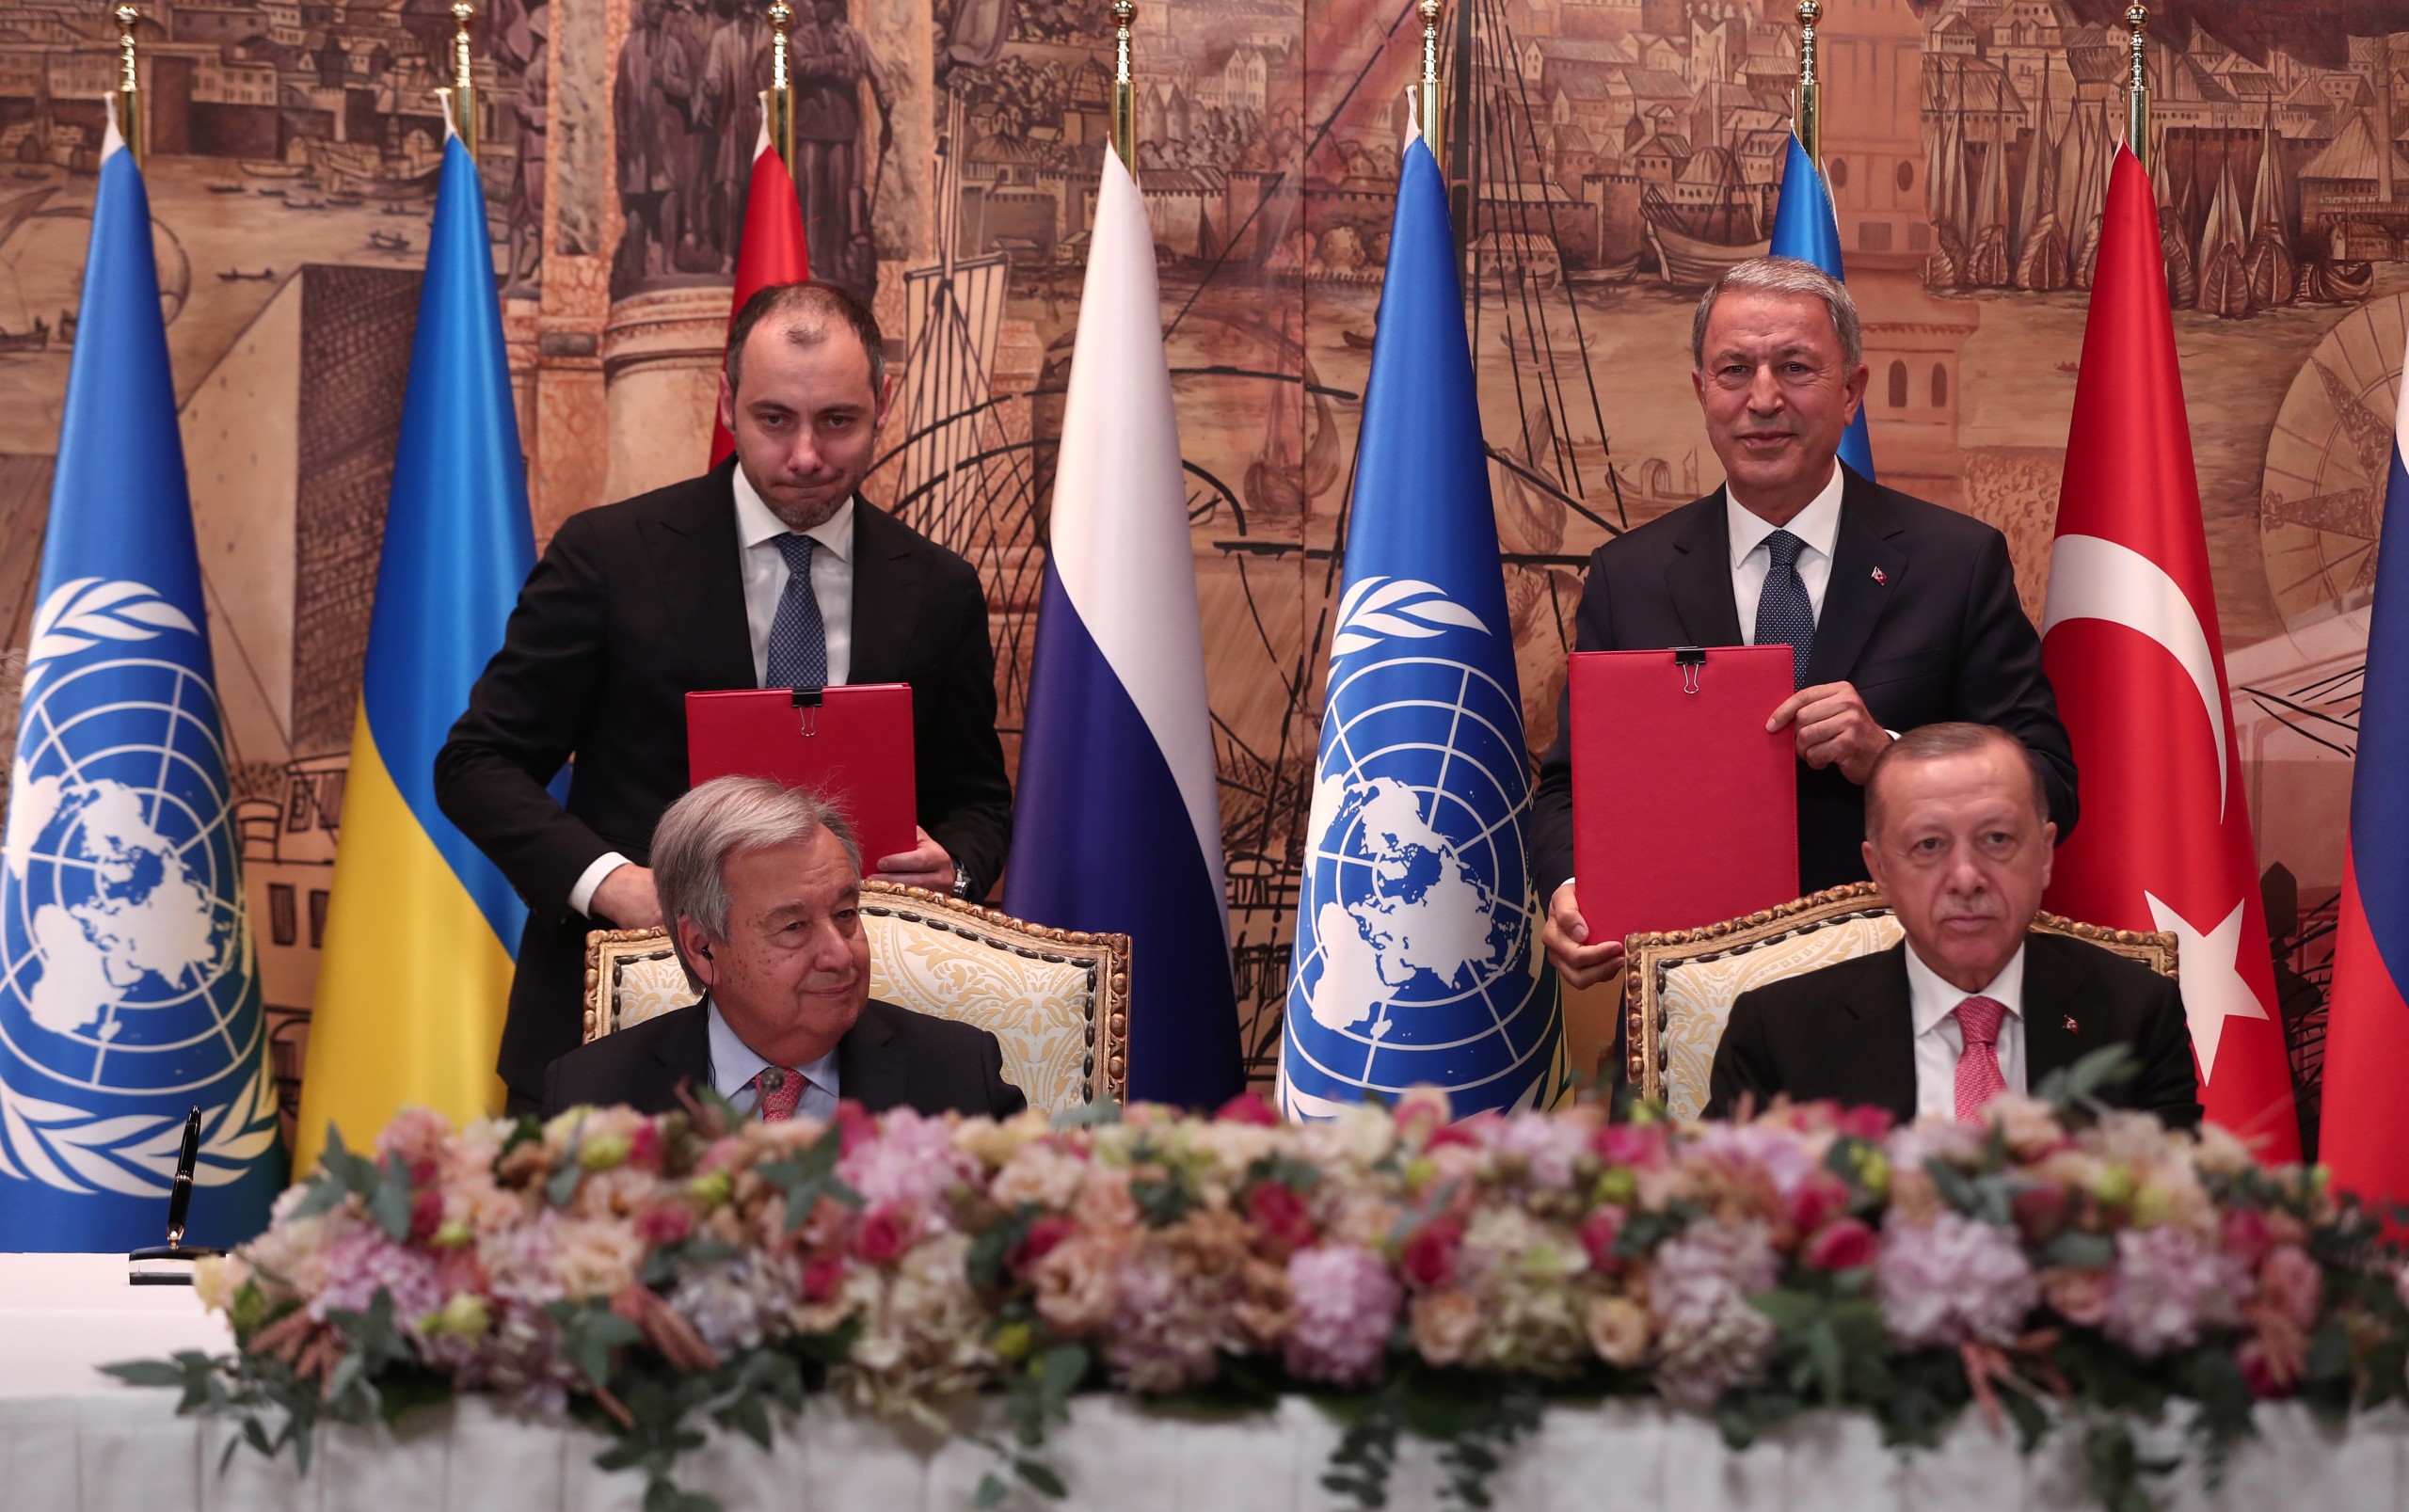 epa10086413 Turkish President Recep Tayyip Erdogan (down-R), UN Secretary-General Antonio Guterres (down-L), Oleksandr Kubrakov (up-L), Minister of Infrastructure of Ukraine and Turkish Defense Minister Hulusi Akar (up-R) attend a signing ceremony of the grain shipment agreement  between Turkey-UN, Russia and Ukraine after their meeting in Istanbul, Turkey, 22 July 2022. According to the agreement, a coordination center will be established to carry out joint inspections at the ports and ensure route security.  EPA/SEDAT SUNA